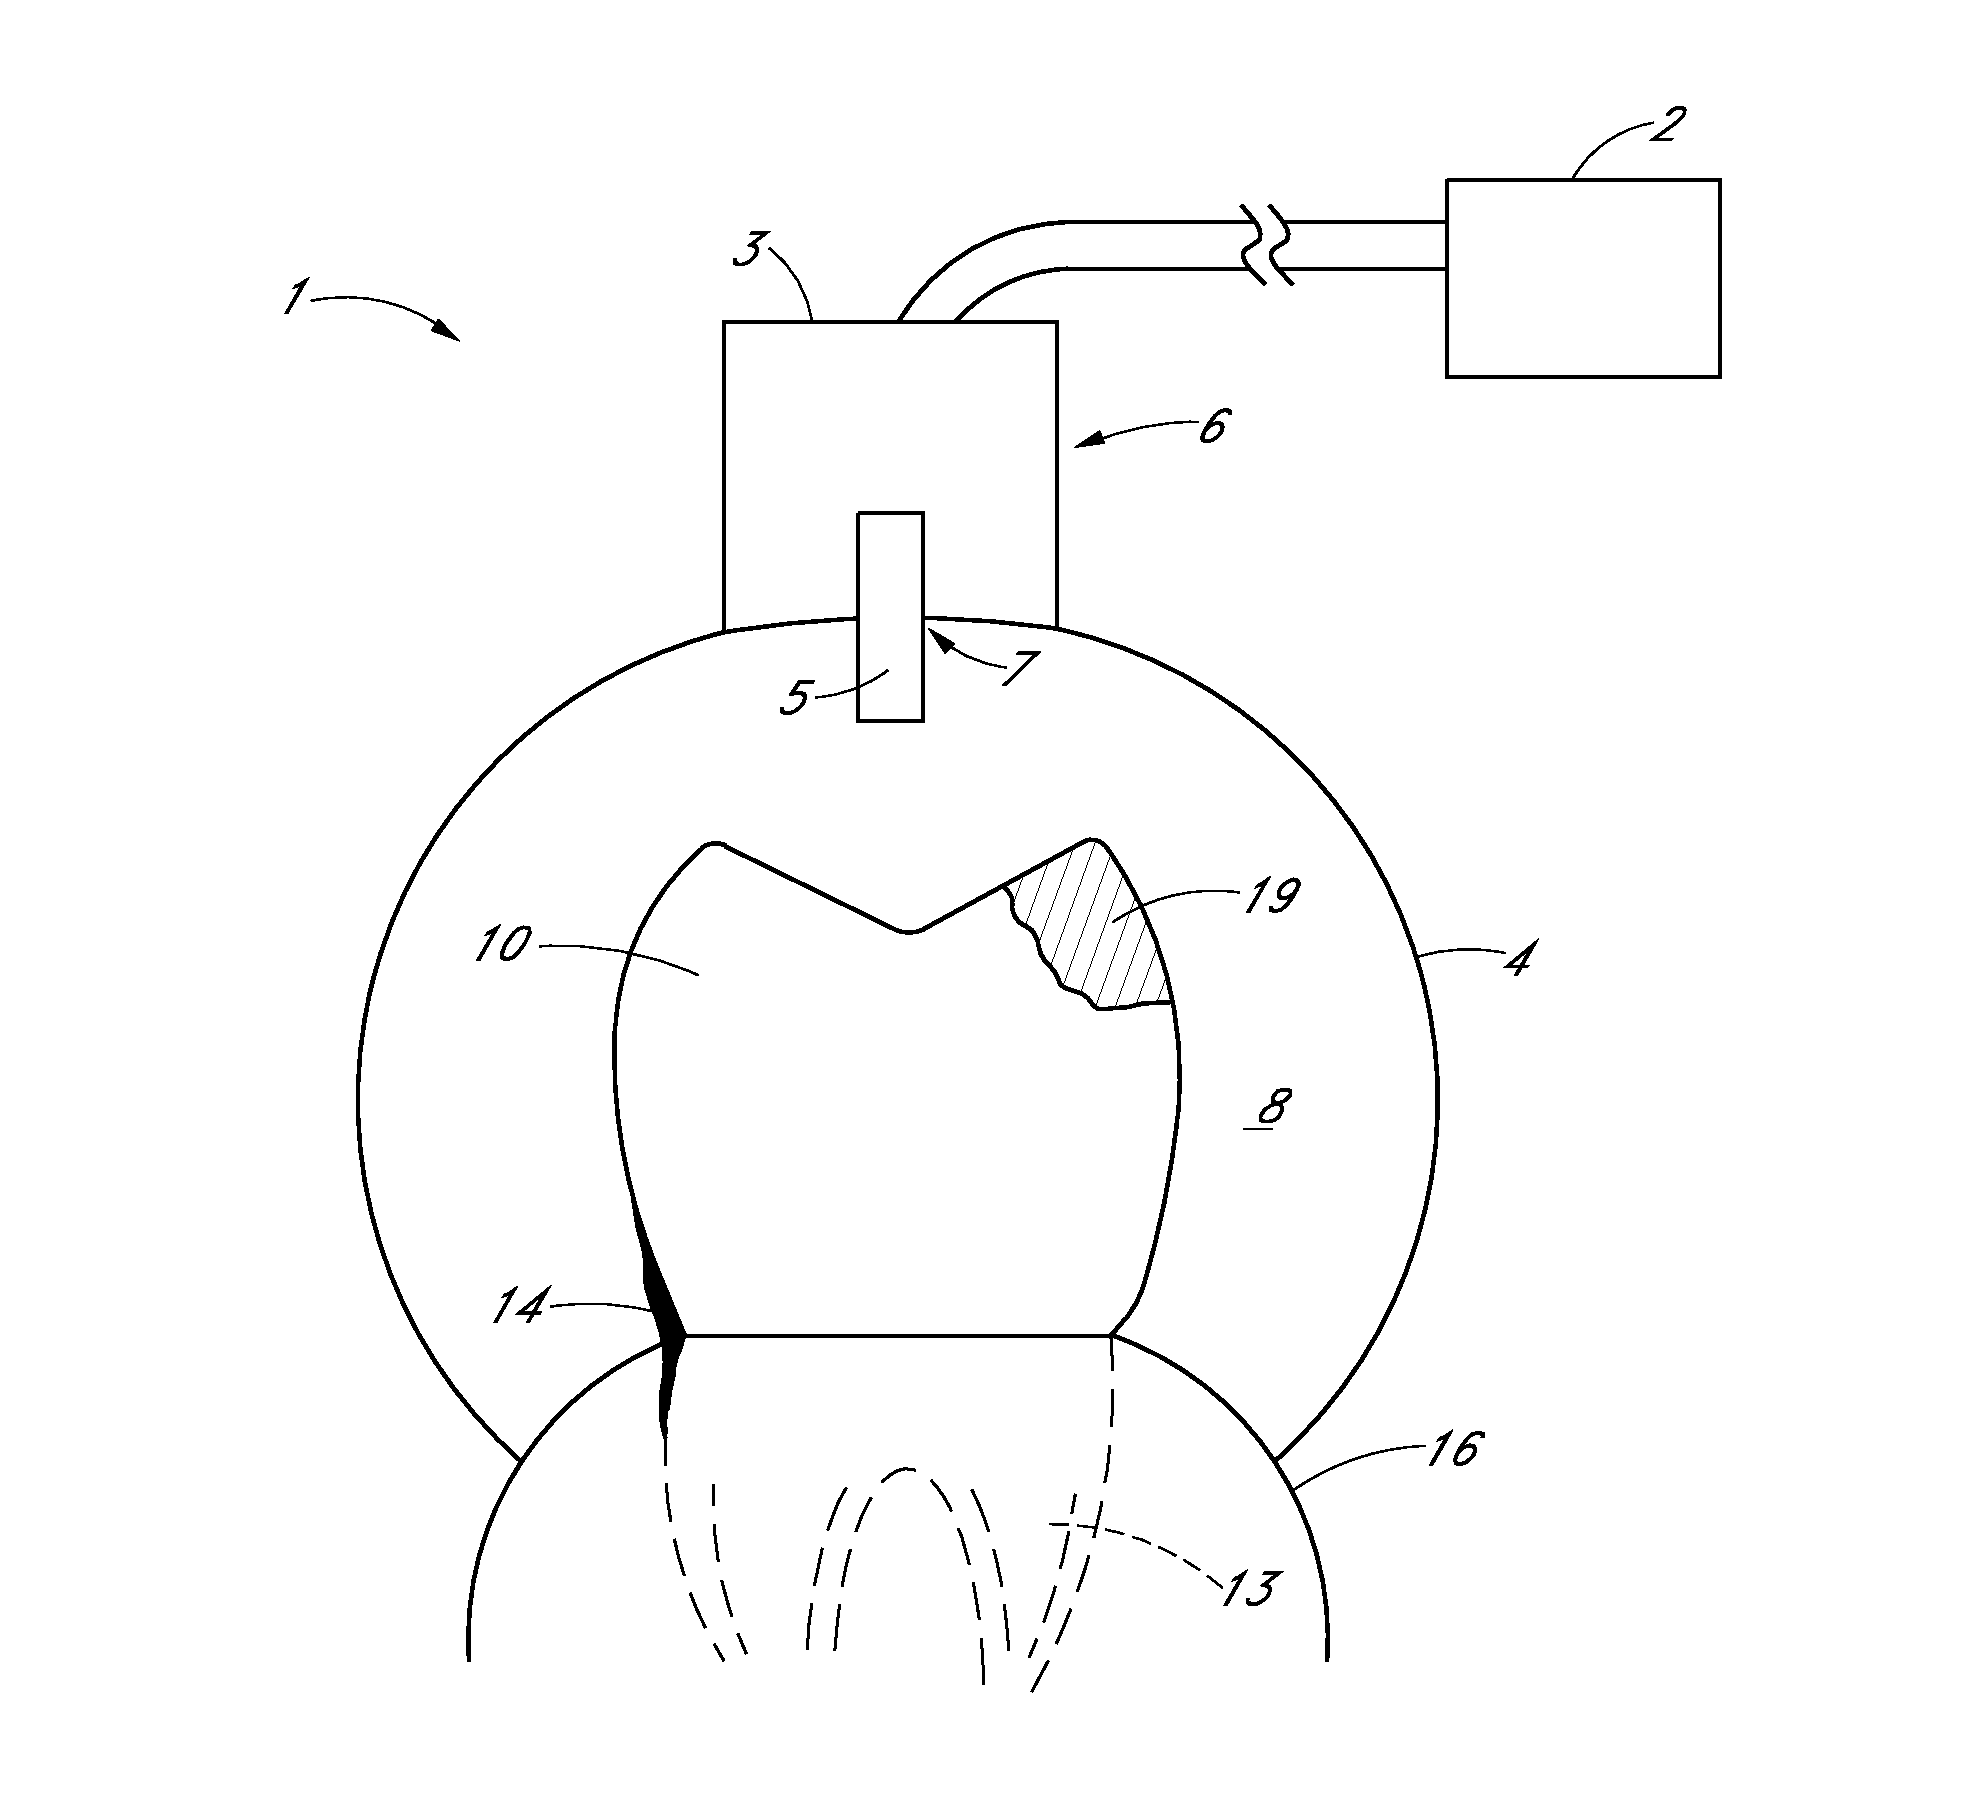 Apparatus and methods for treating teeth